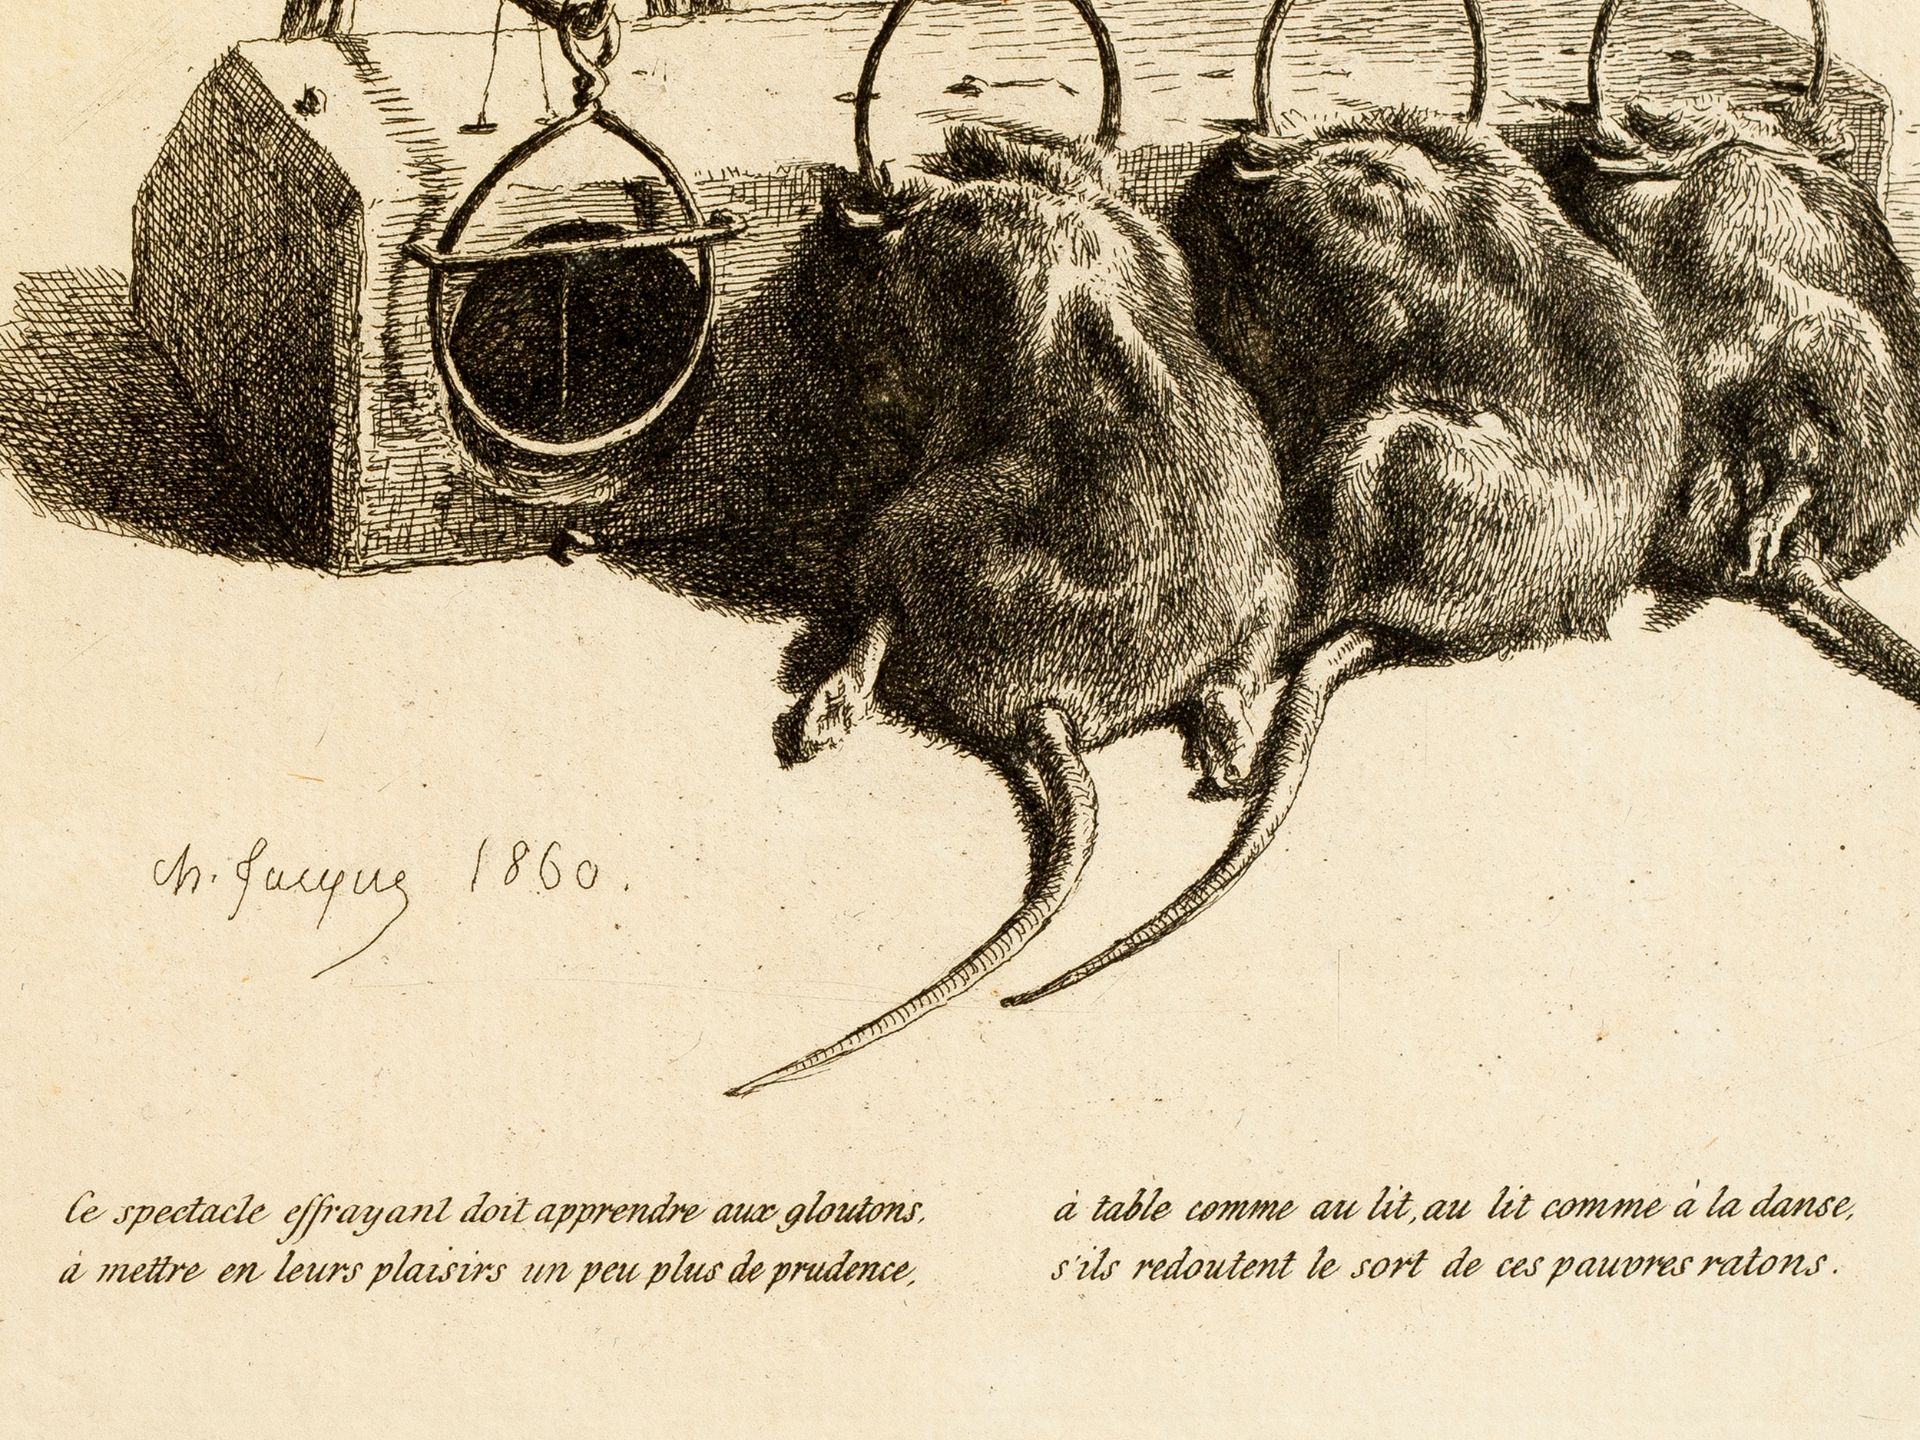 Rat trap, Lithography, 19th century - Image 3 of 5